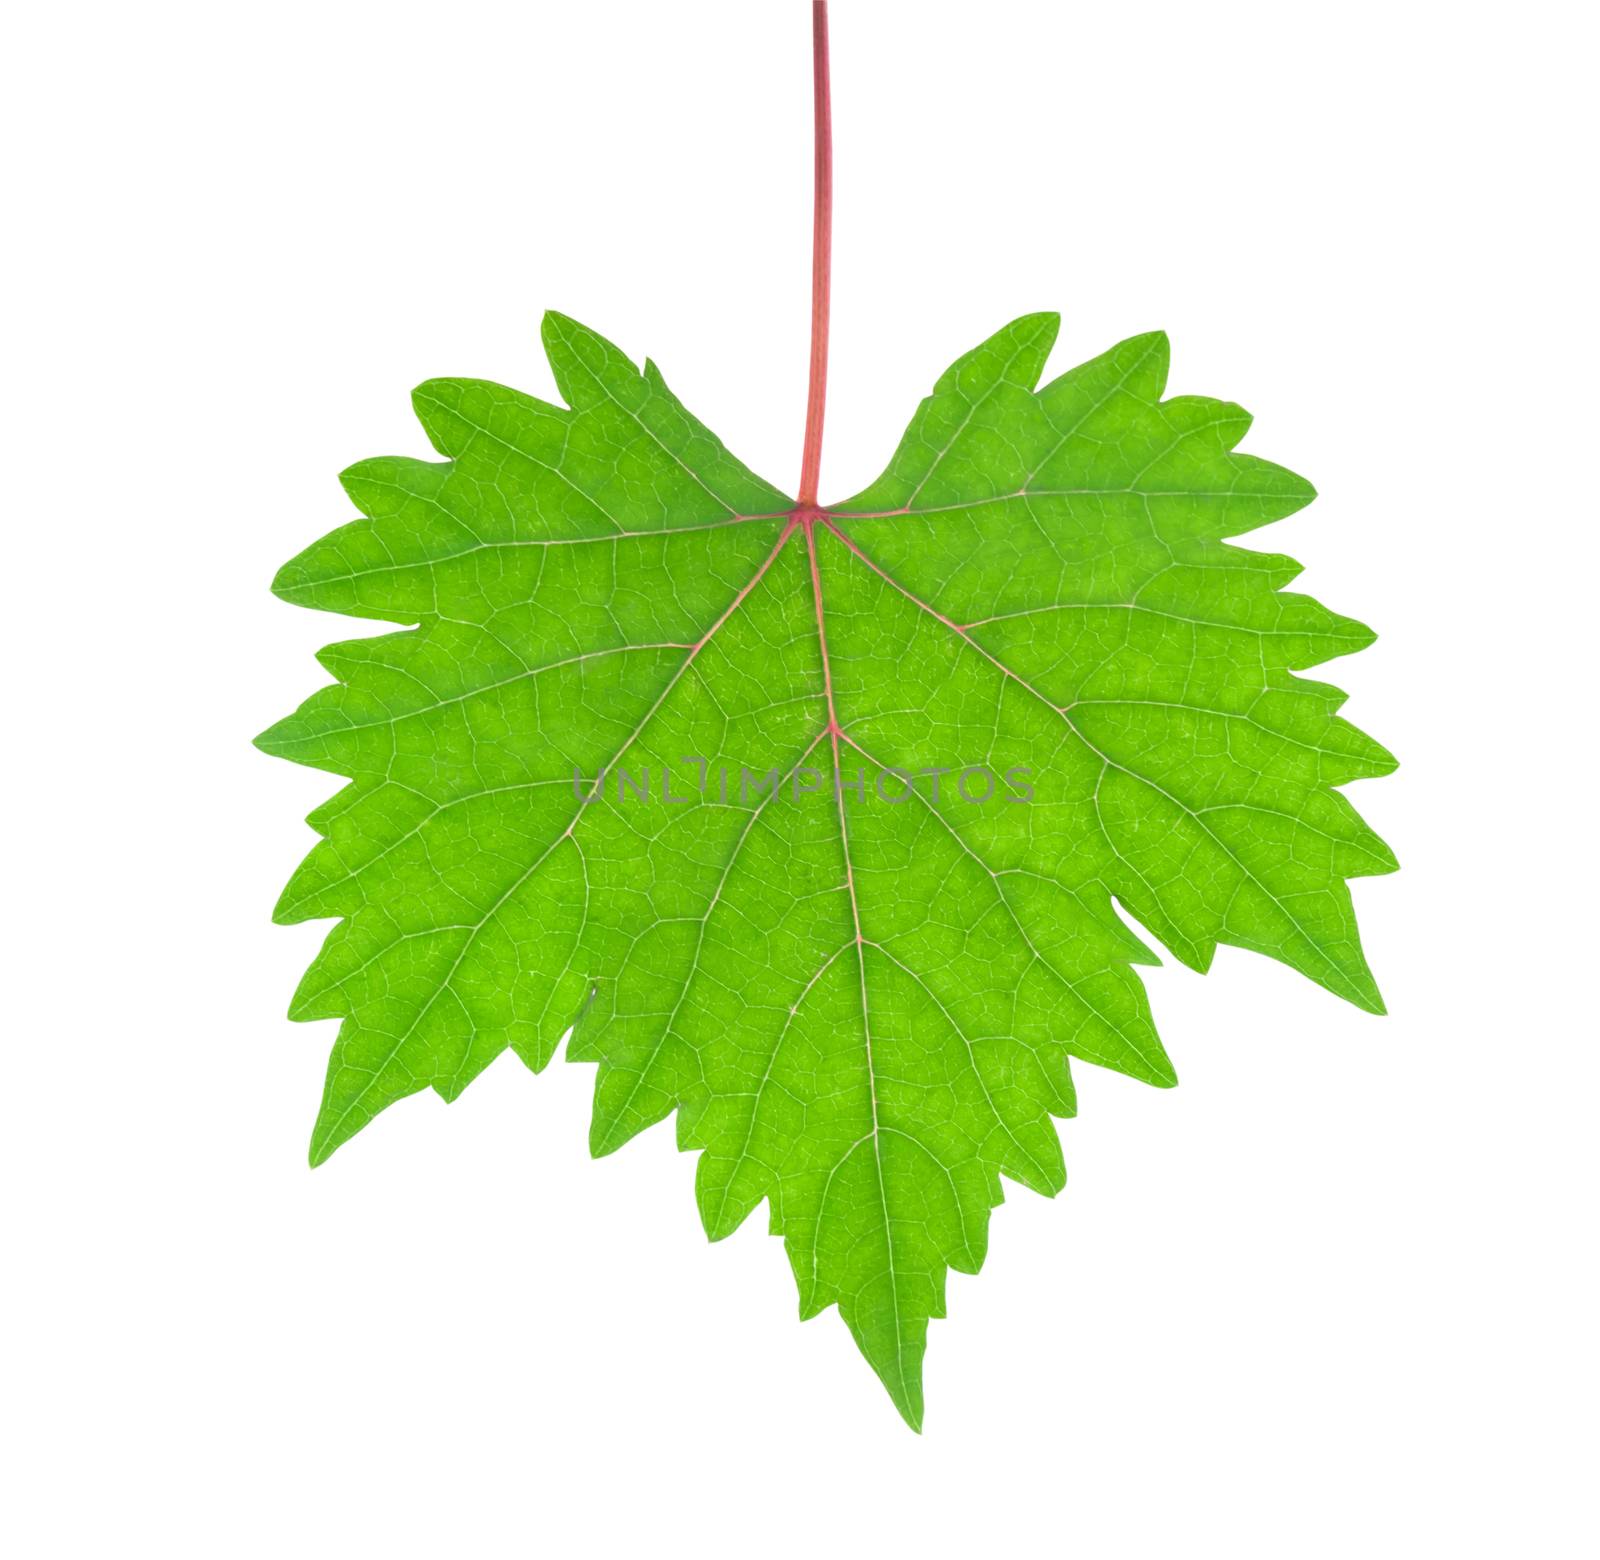 Grape leaves isolated on white background with clipping path by pt.pongsak@gmail.com